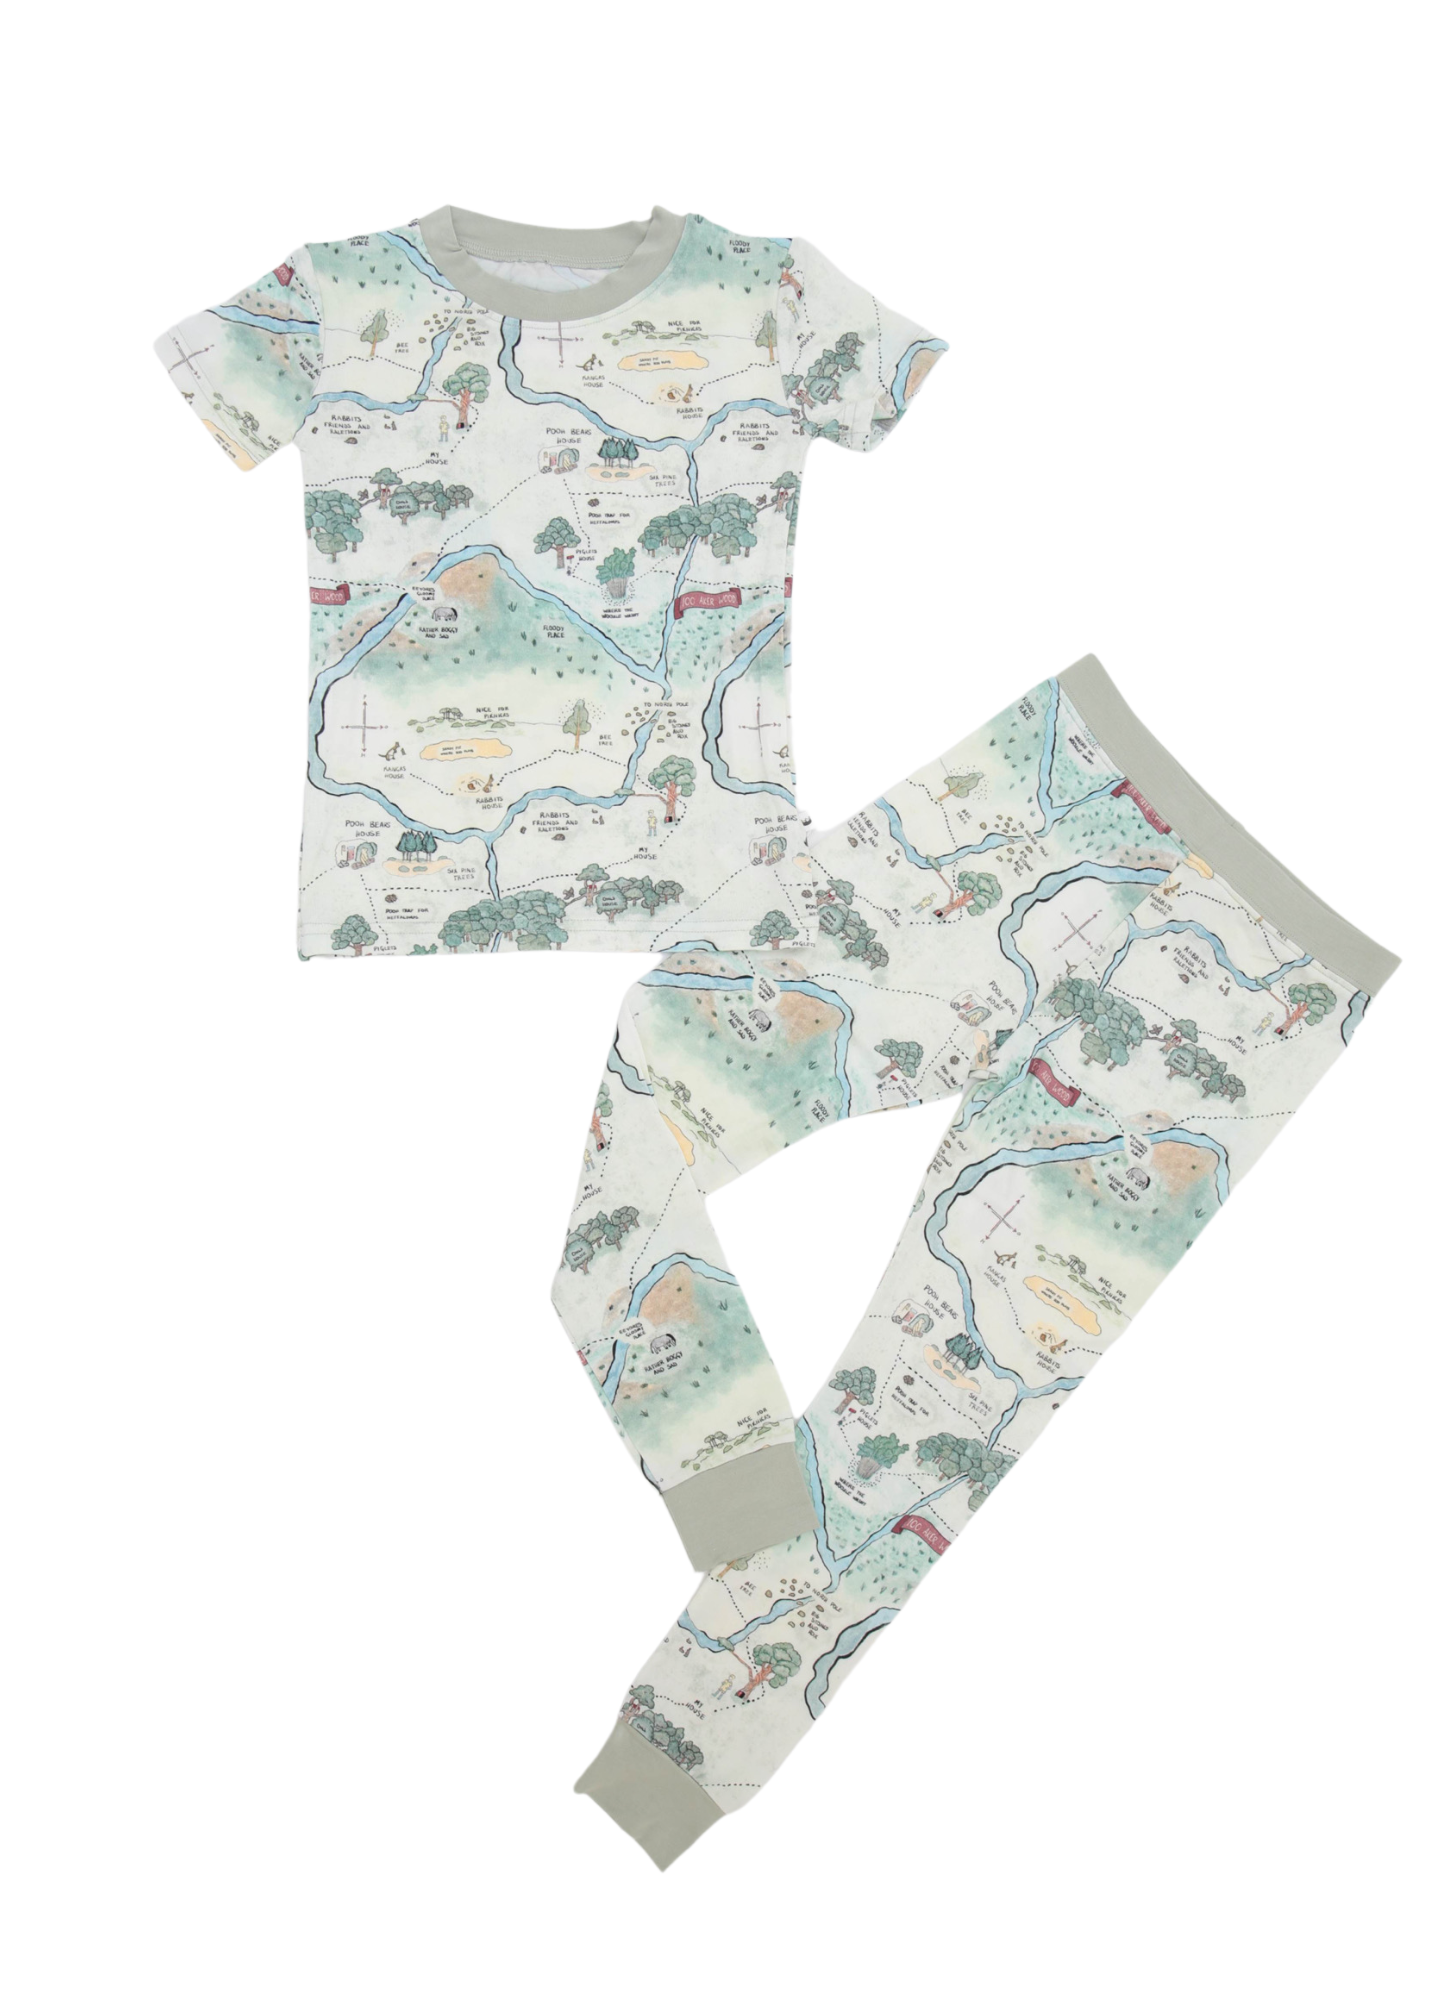 Hundred Acre Woods Short Sleeve Jammies